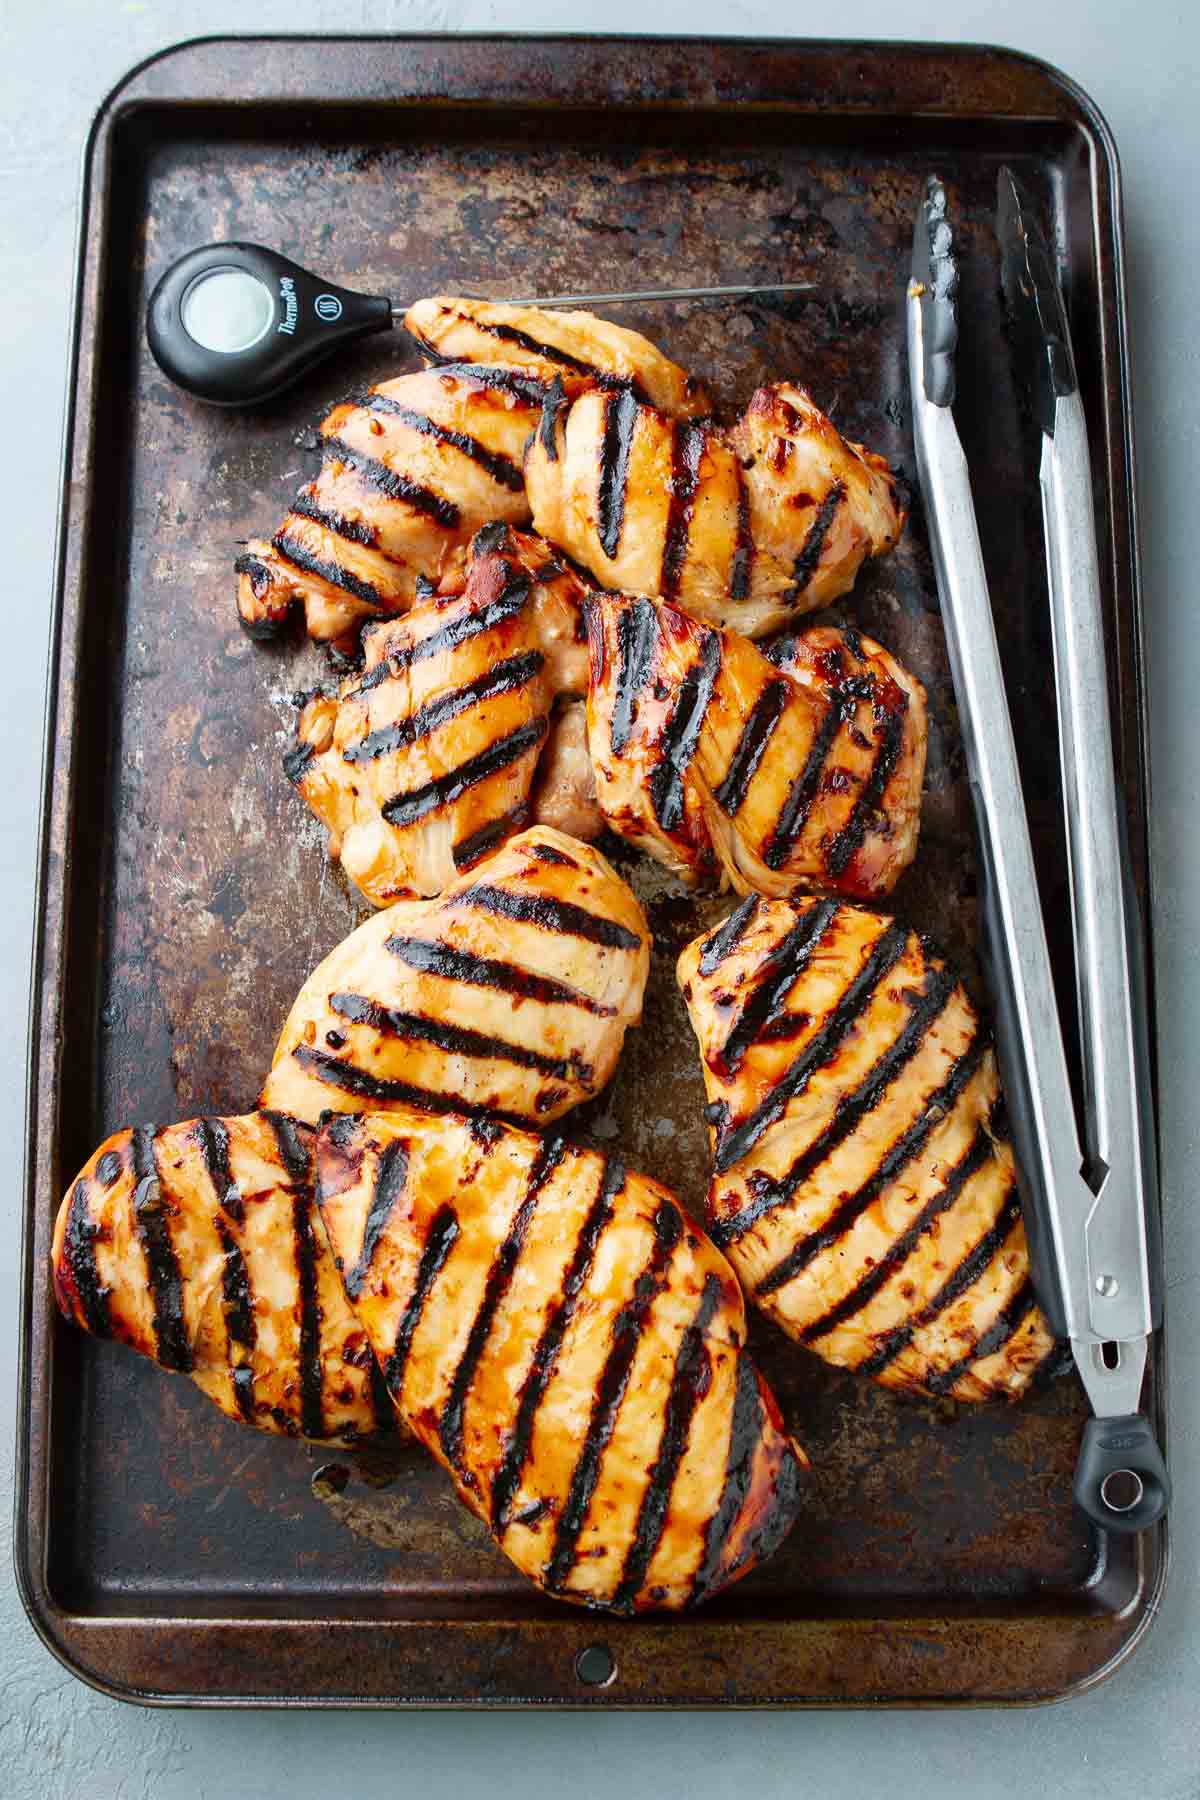 Grilled chicken breasts, tongs and a thermometer on a baking sheet.